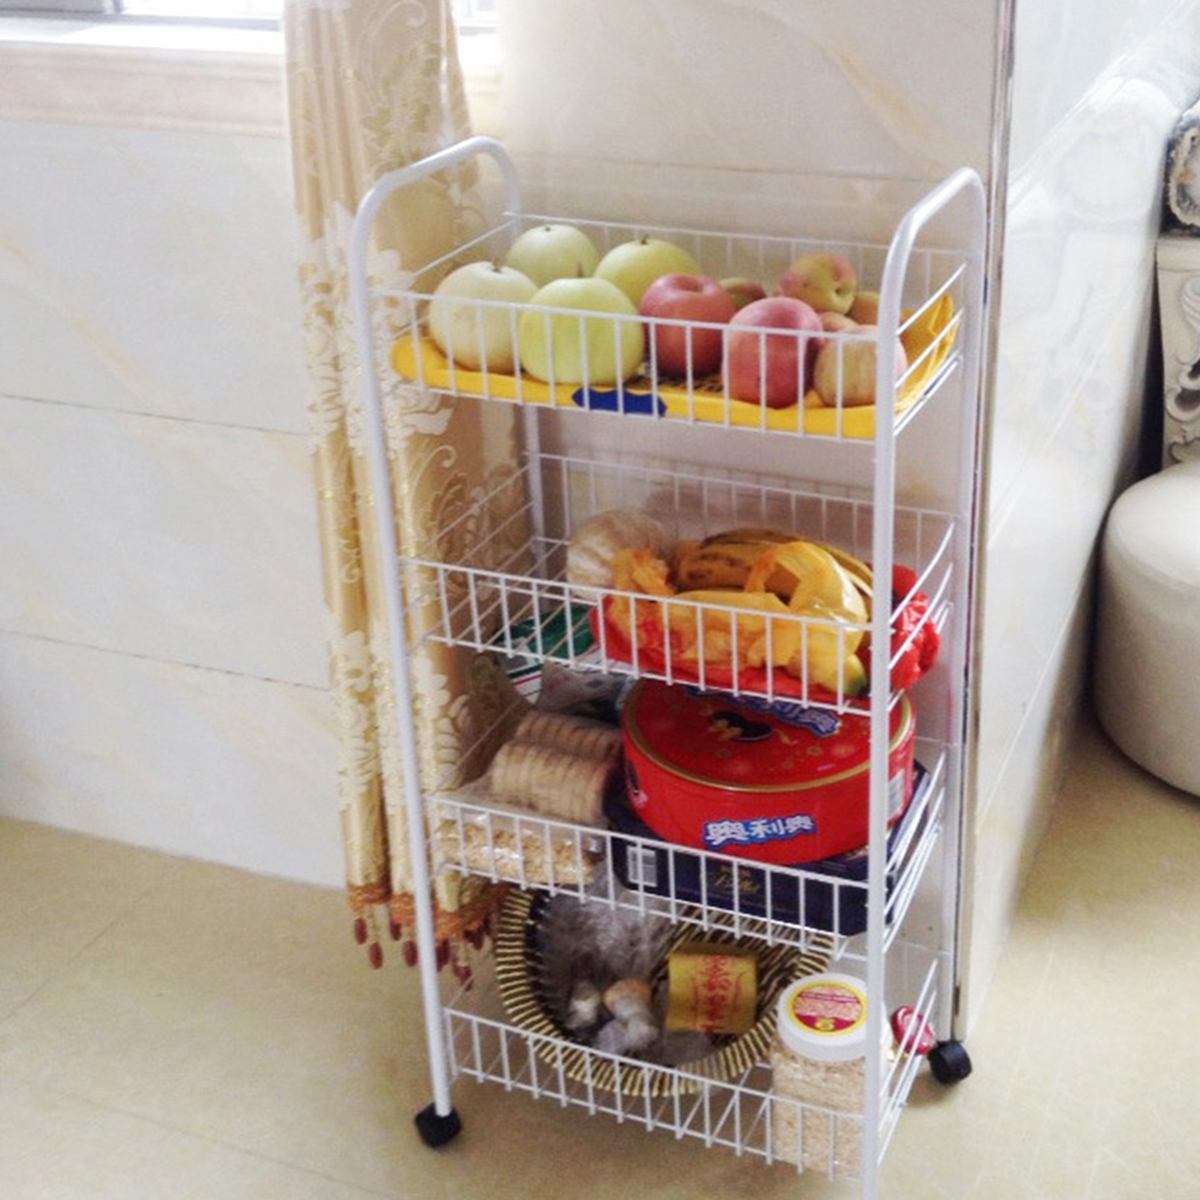 34-Layers-Multi-function-Shelf-Portable-Cart-Wheels-for-Household-Kitchen-Items-Storage-1671773-7